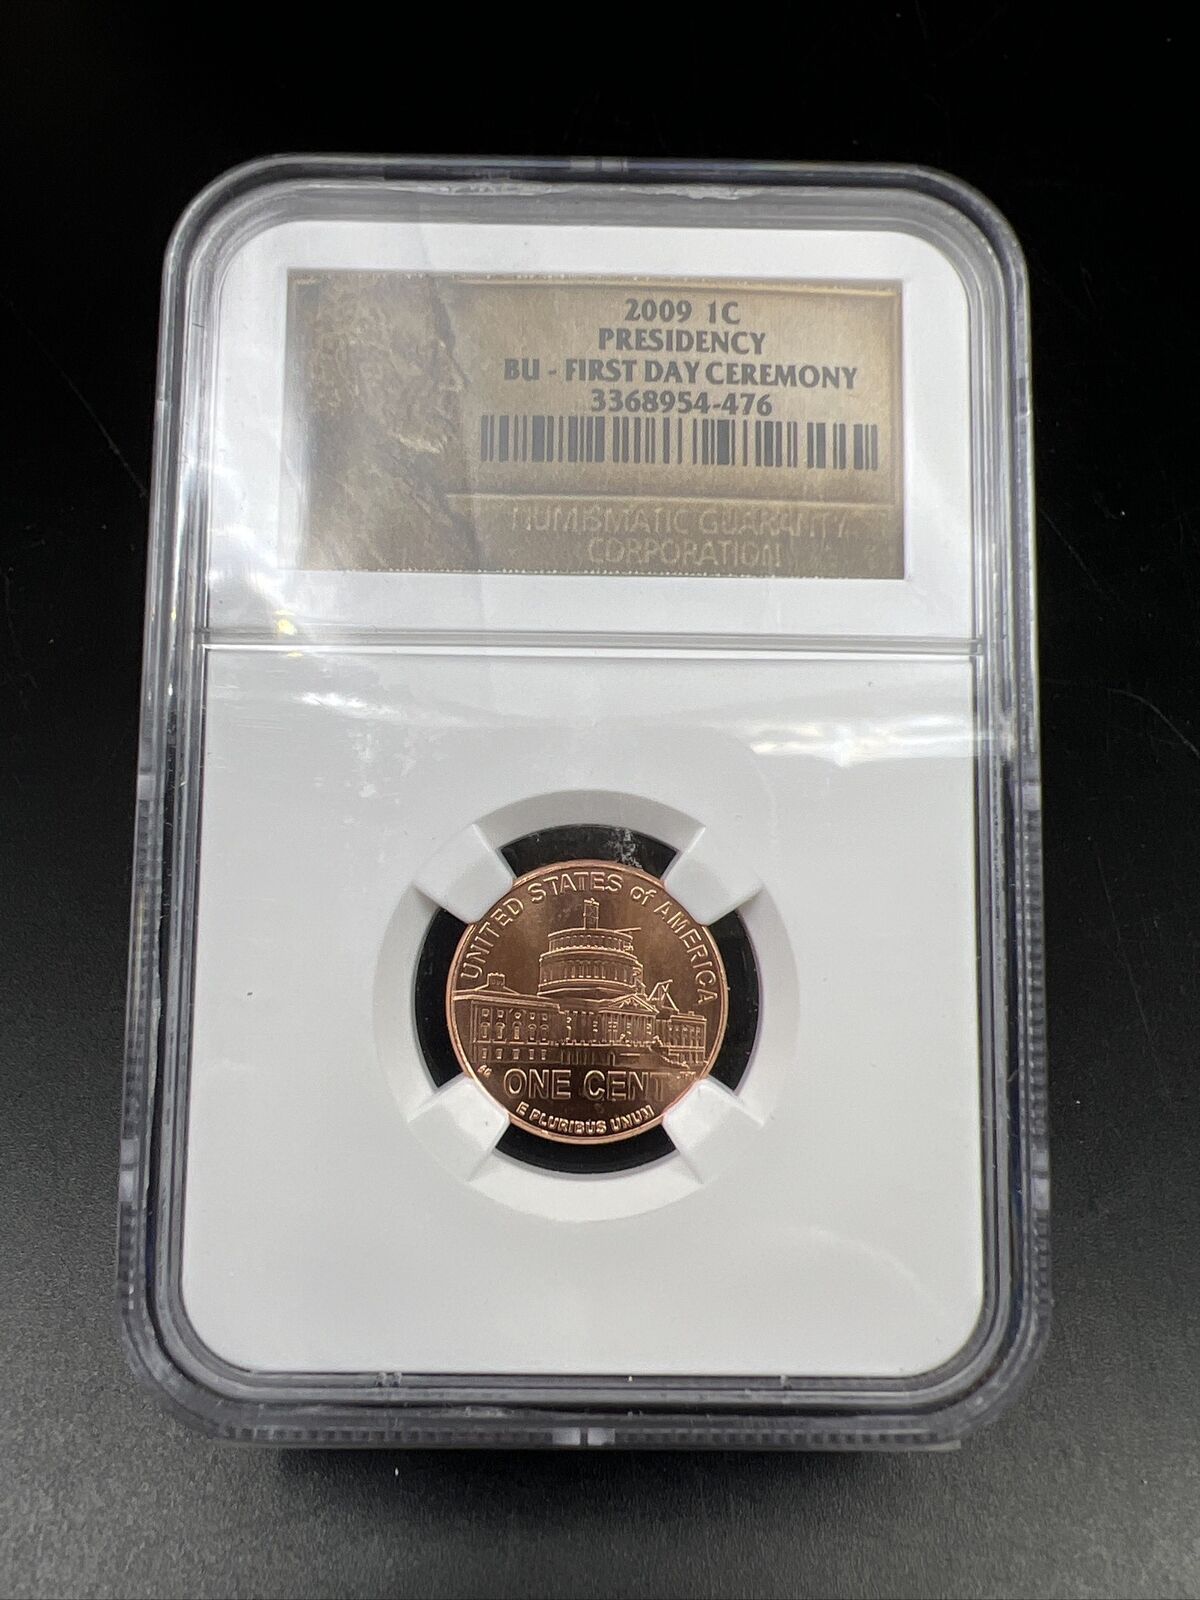 2009 P Lincoln 1c Presidency coin NGC Certified BU First Day Ceremony